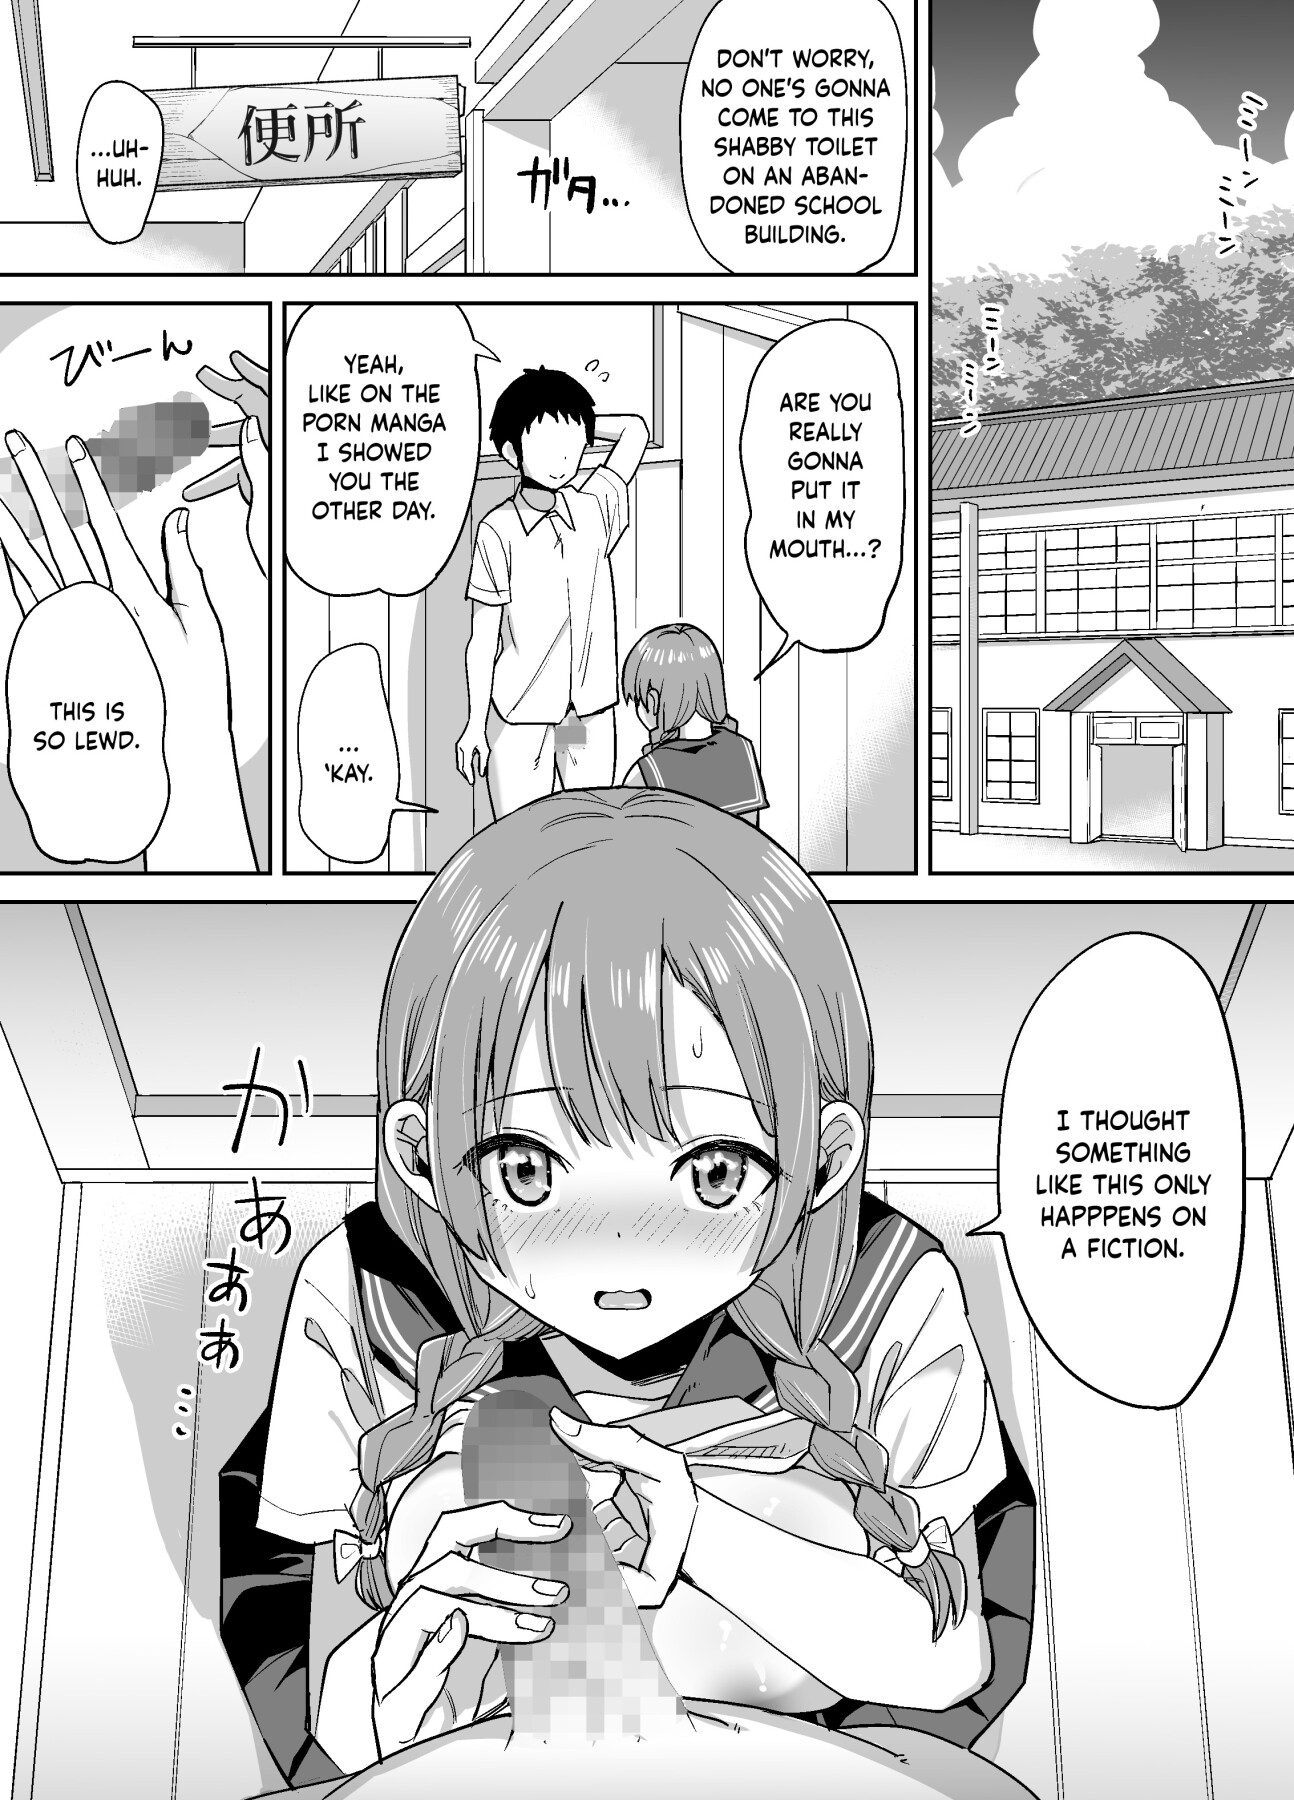 Hentai Manga Comic-In the countryside, a cute girlfriend is taken over by a delinquent senior.-Read-2